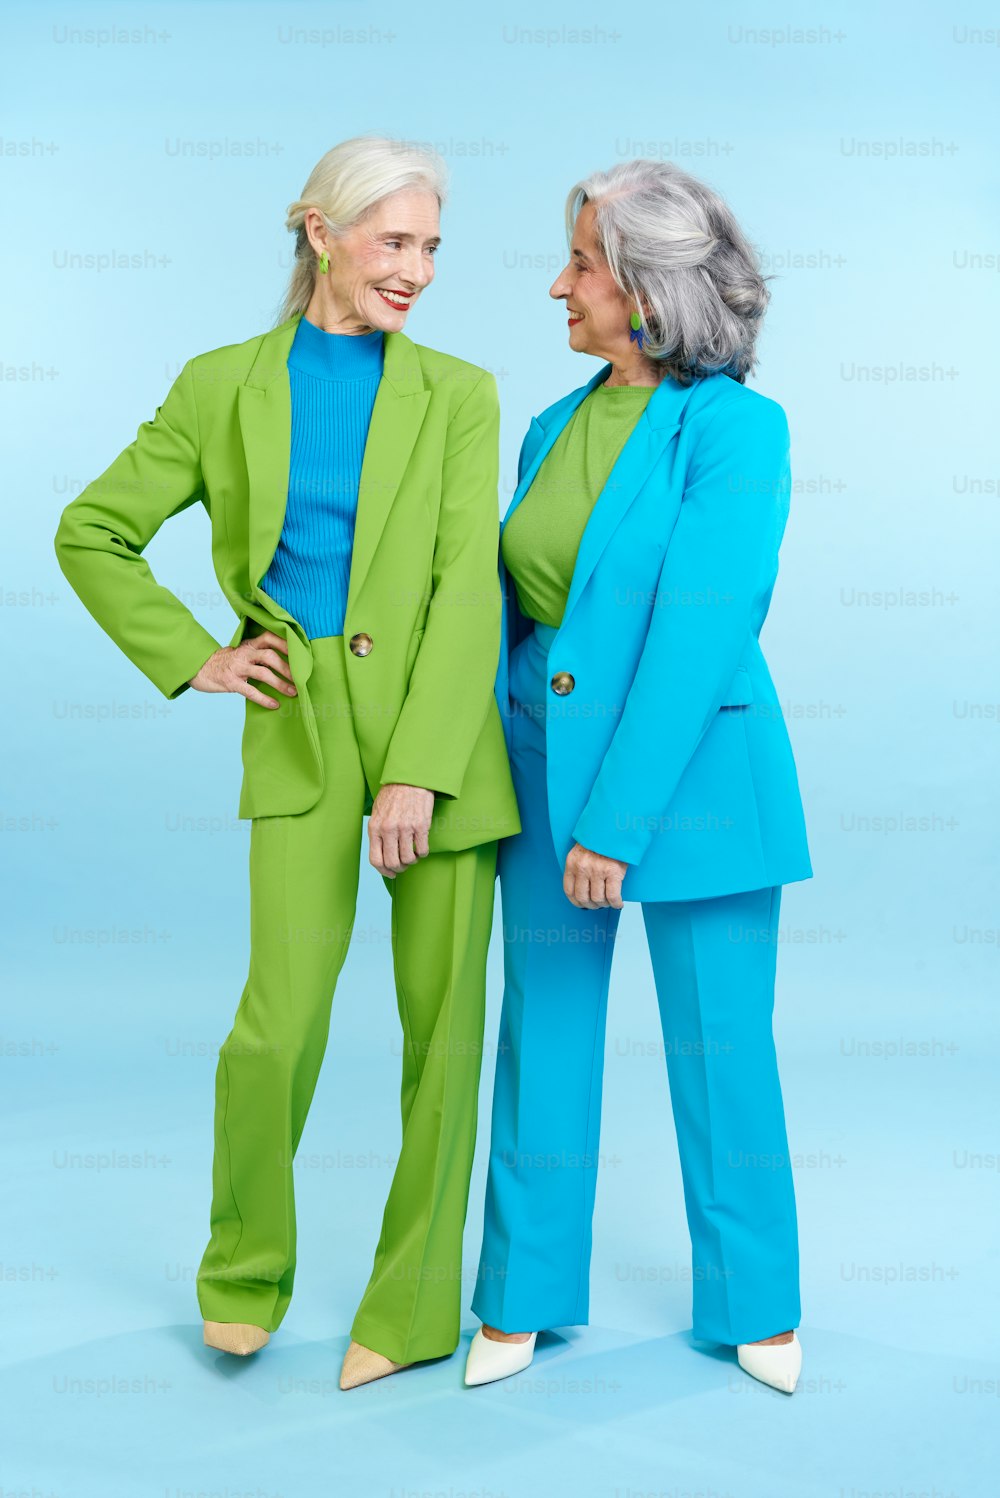 two women standing next to each other in green and blue outfits